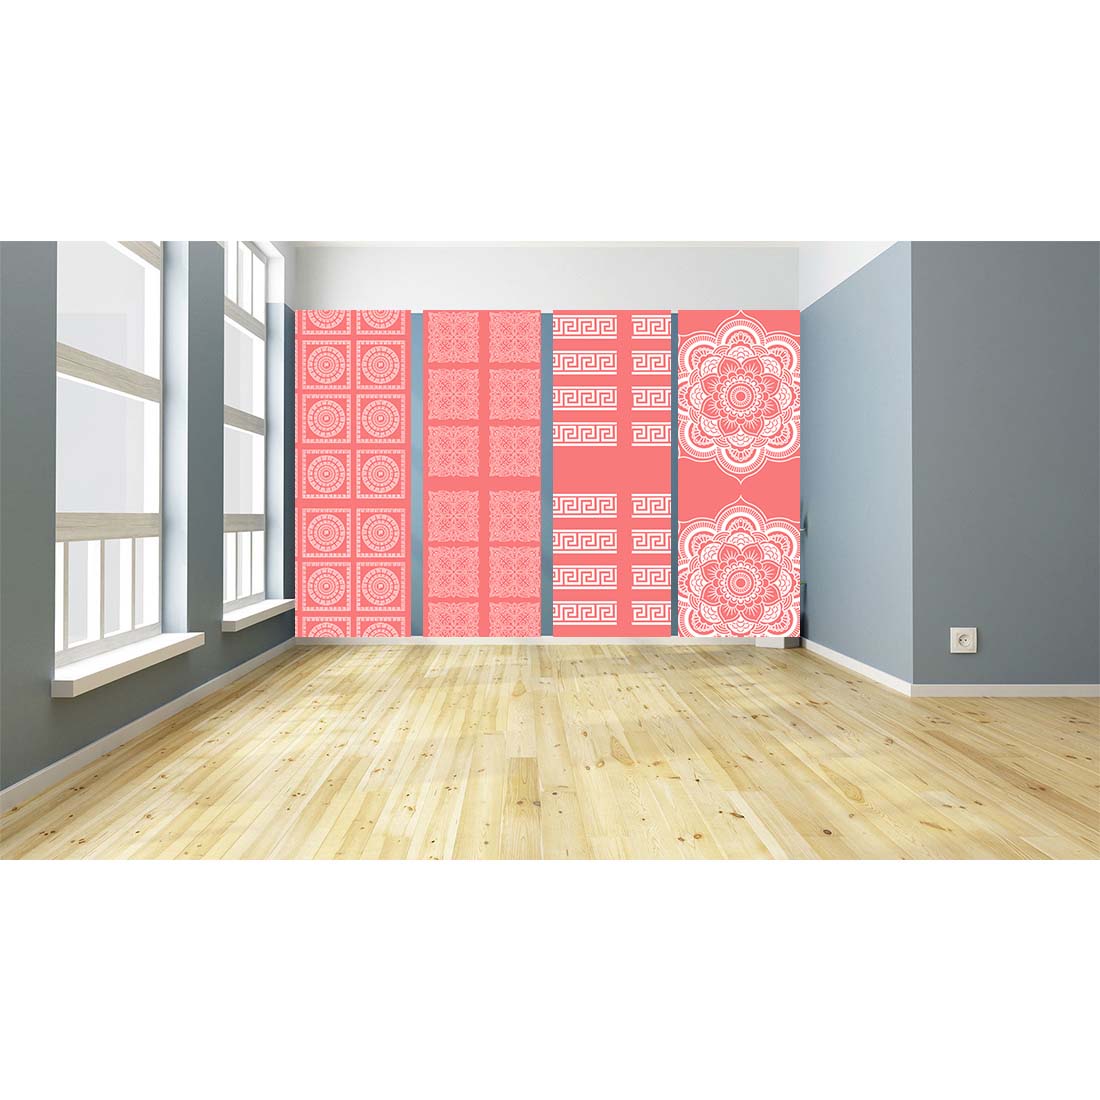 Room Design pattern preview image.